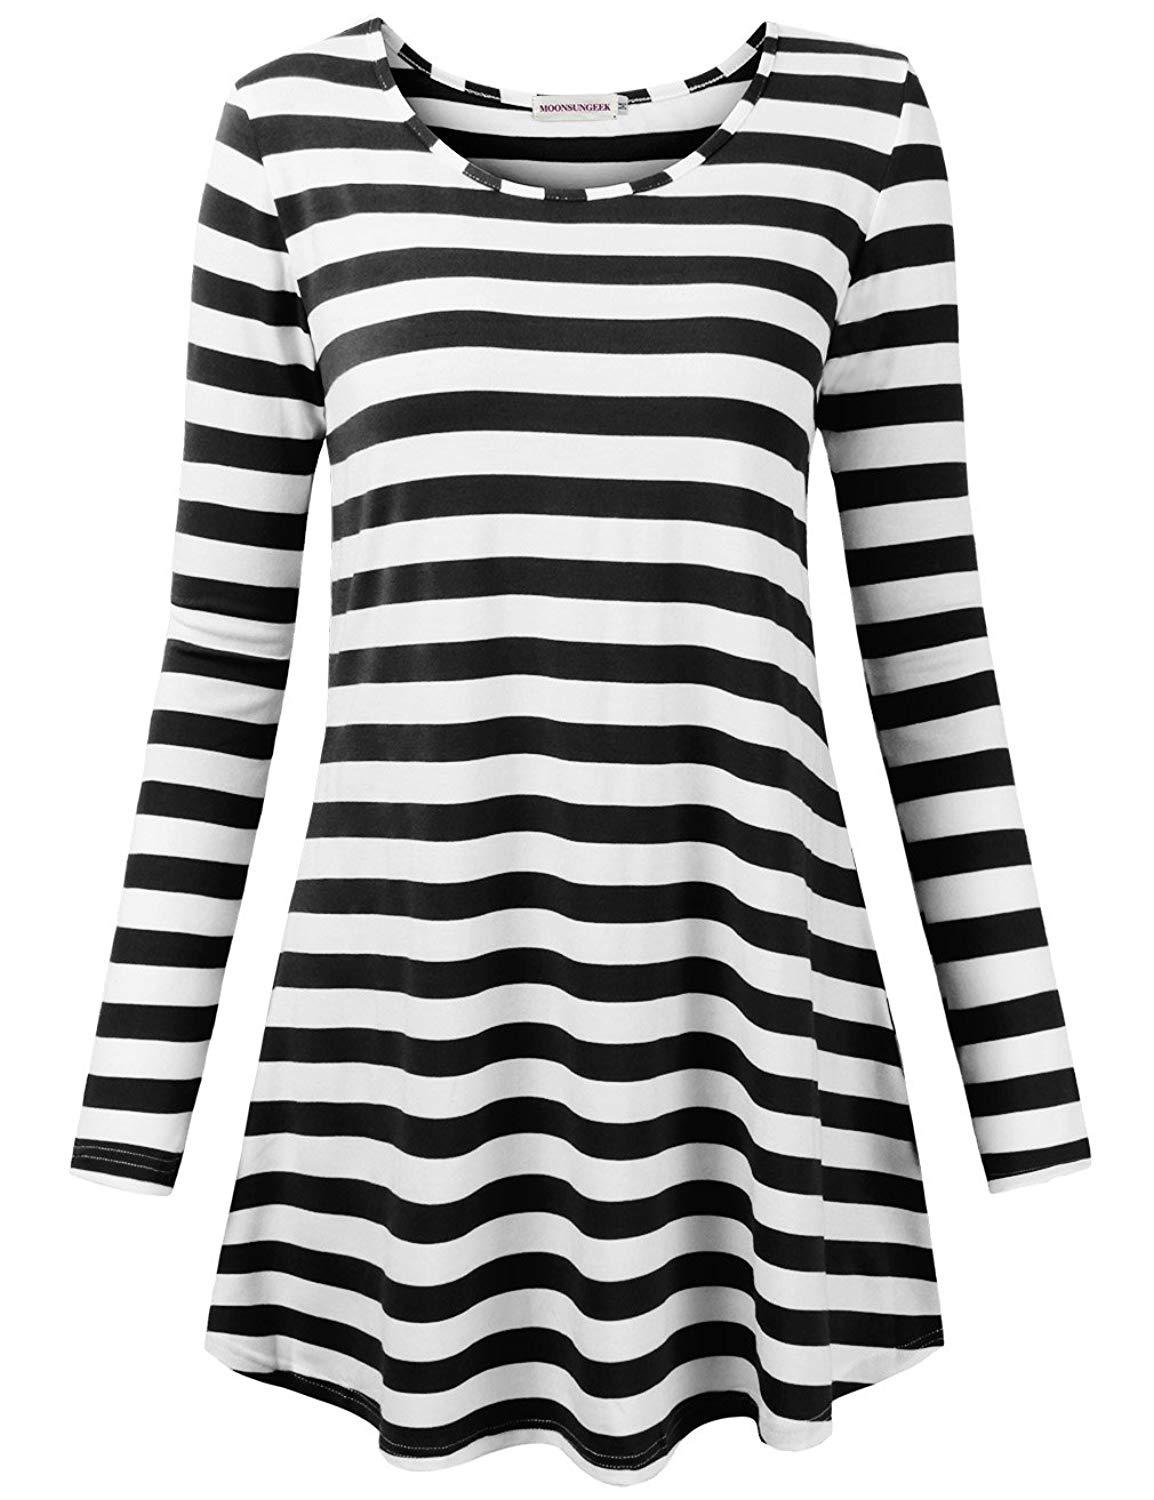 Moosungeek Womens Black Stripe Pattern Loose Tunic Top - Stockpoint Apparel Outlet